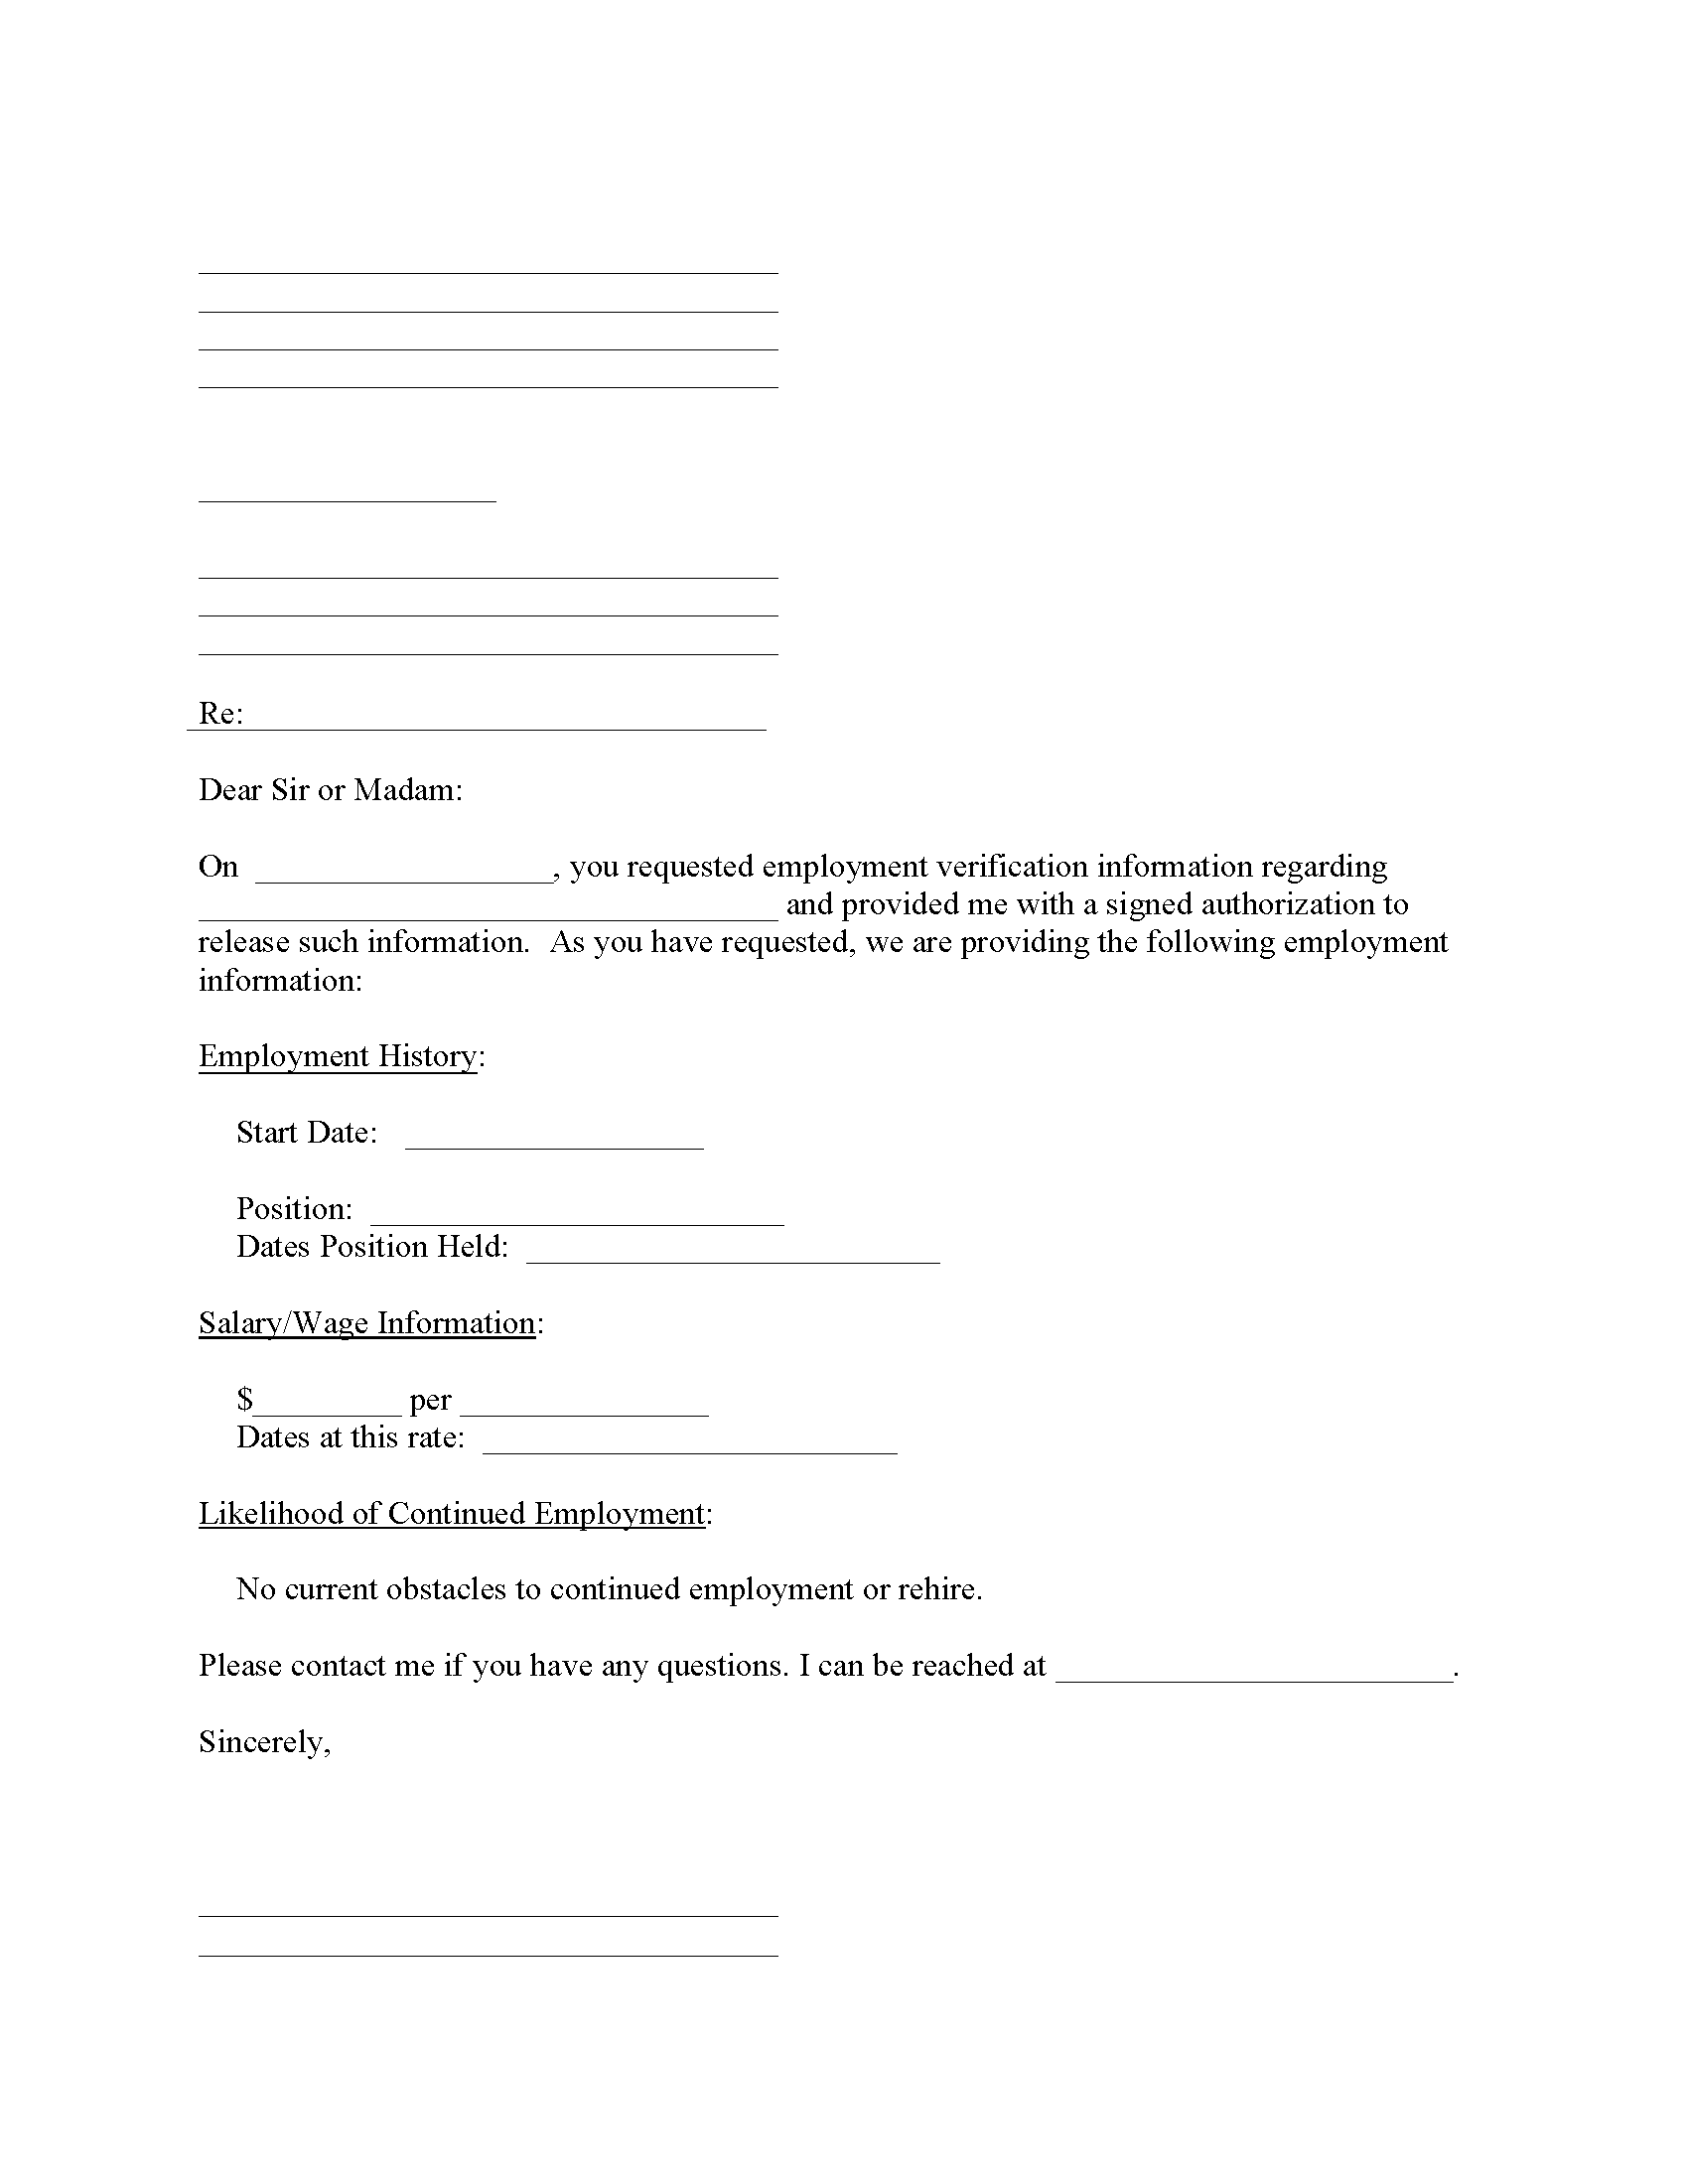 Business Forms Archives Page Of Free Printable Legal Forms 50112 Hot Sex Picture 0979